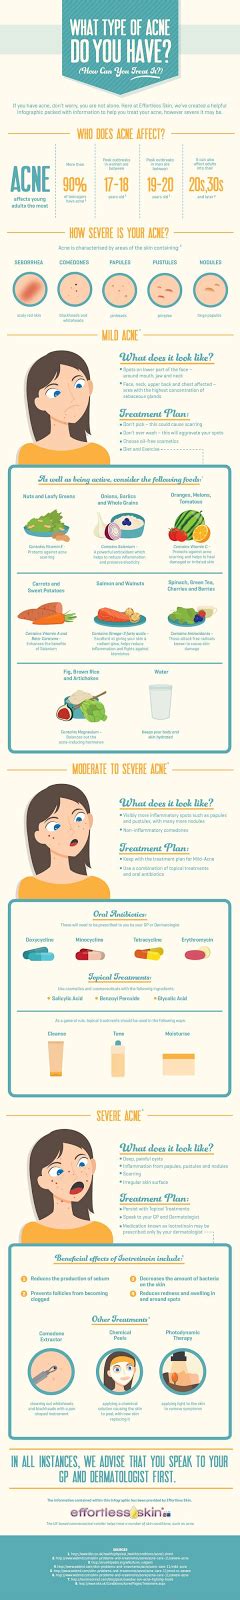 Face Types Of Acne Different Types Of Acne Cover Up Pimples